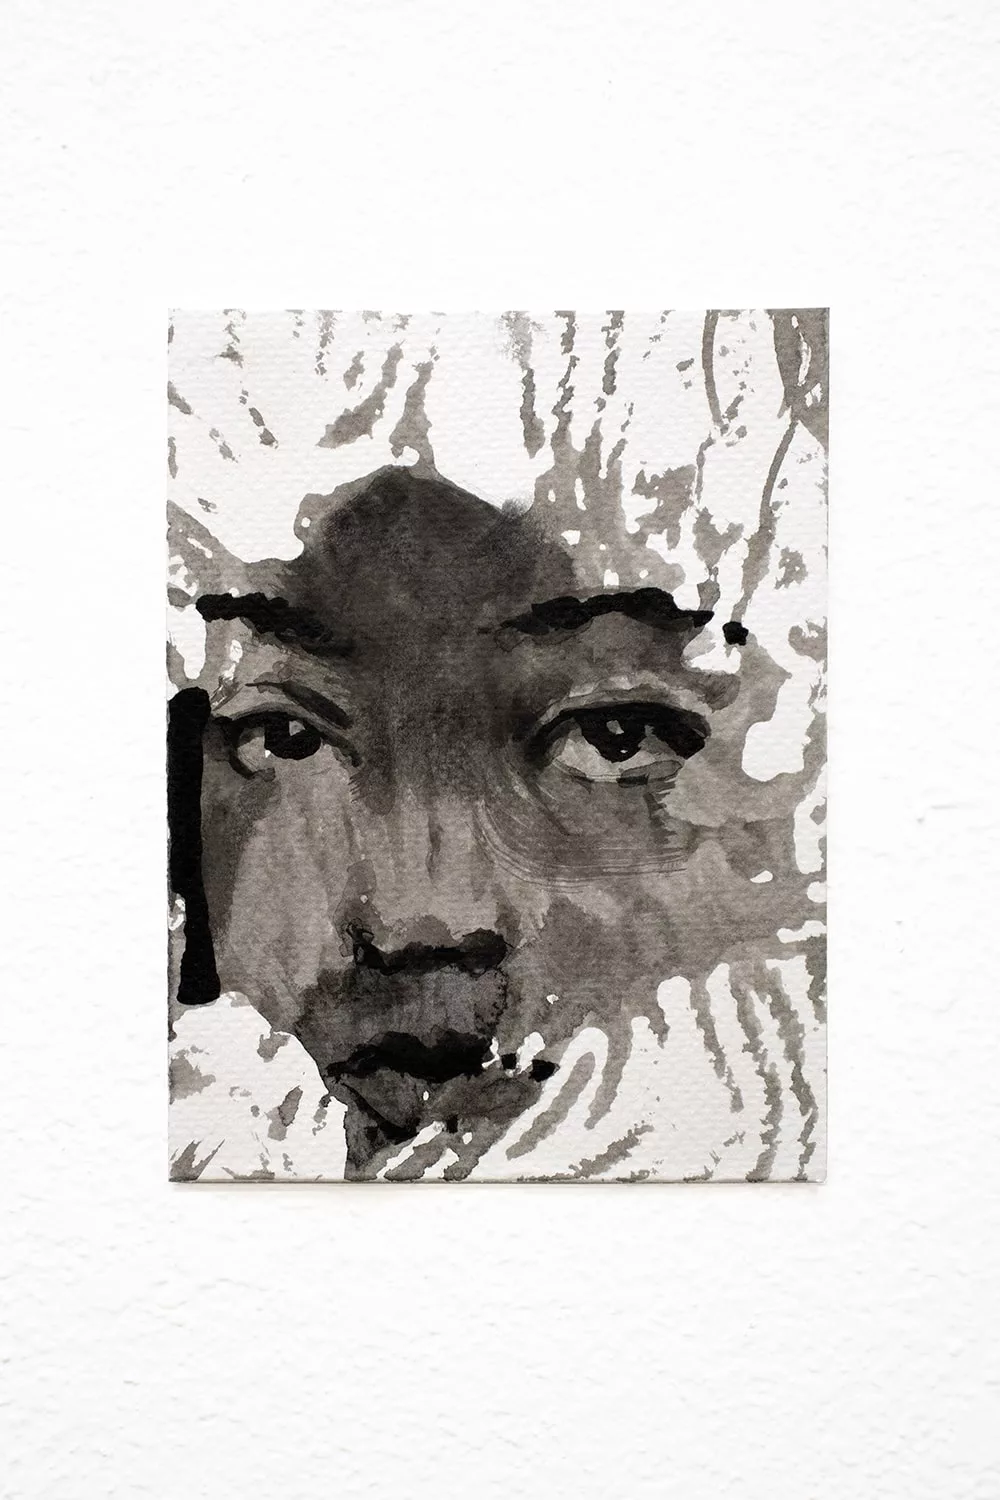 Anastasia 02 - A Captivating Small Portrait Painting in Ink on Paper 4